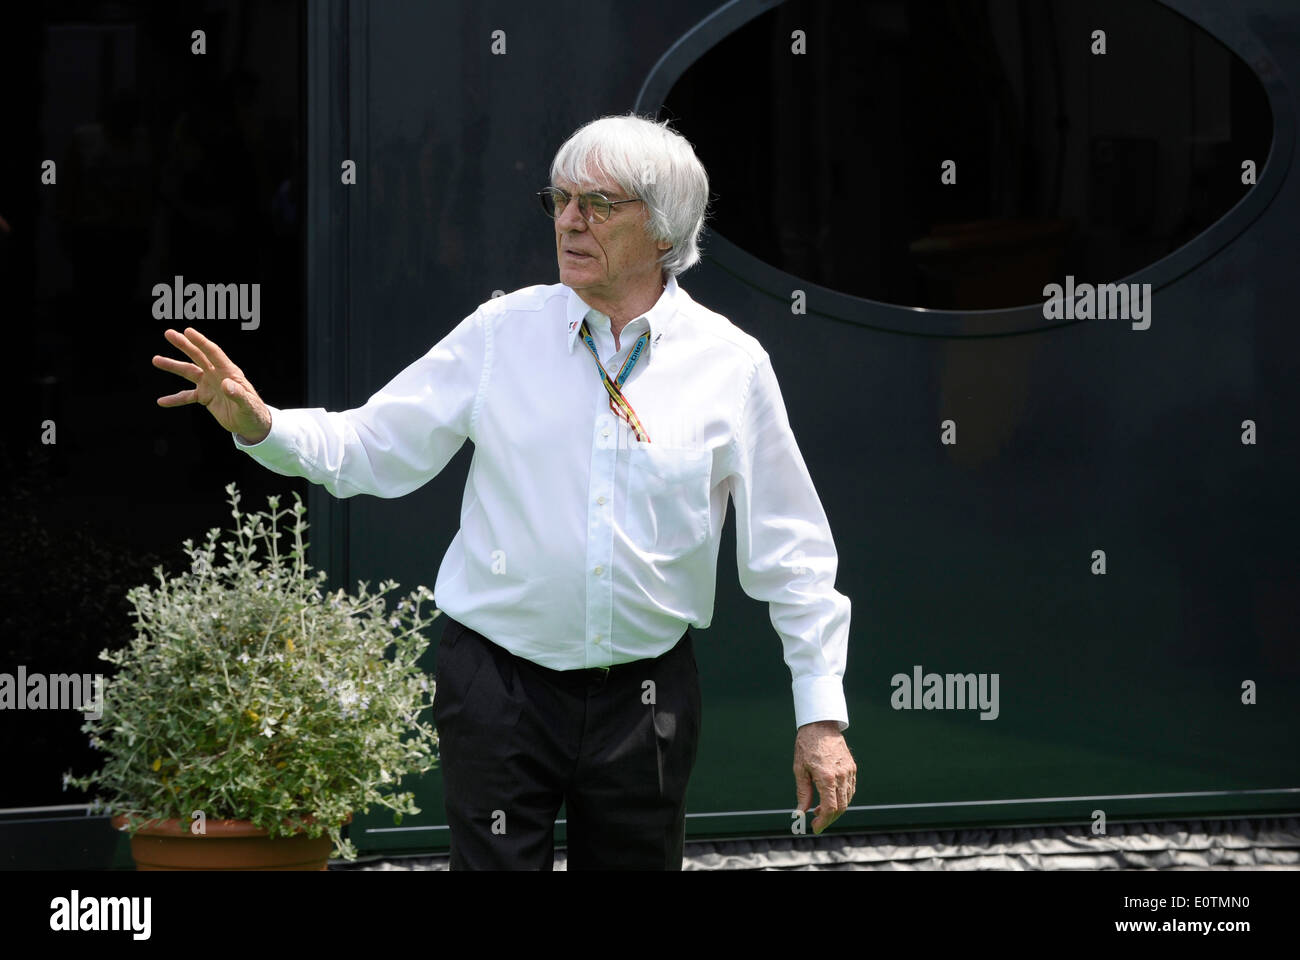 F1 Boss High Resolution Stock Photography and Images - Alamy